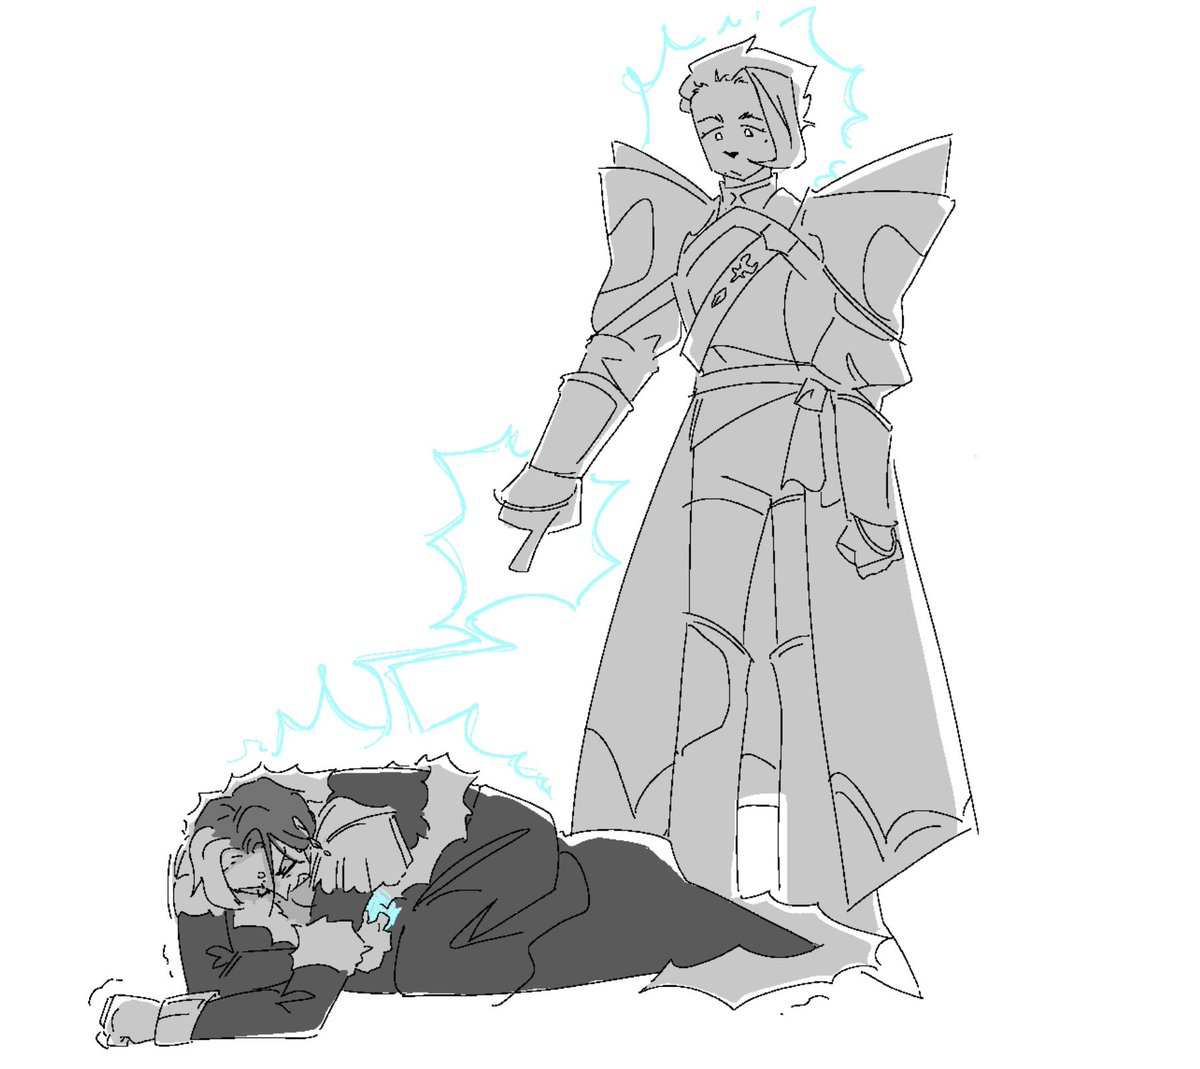 my wol projecting her period cramps onto emet-selch